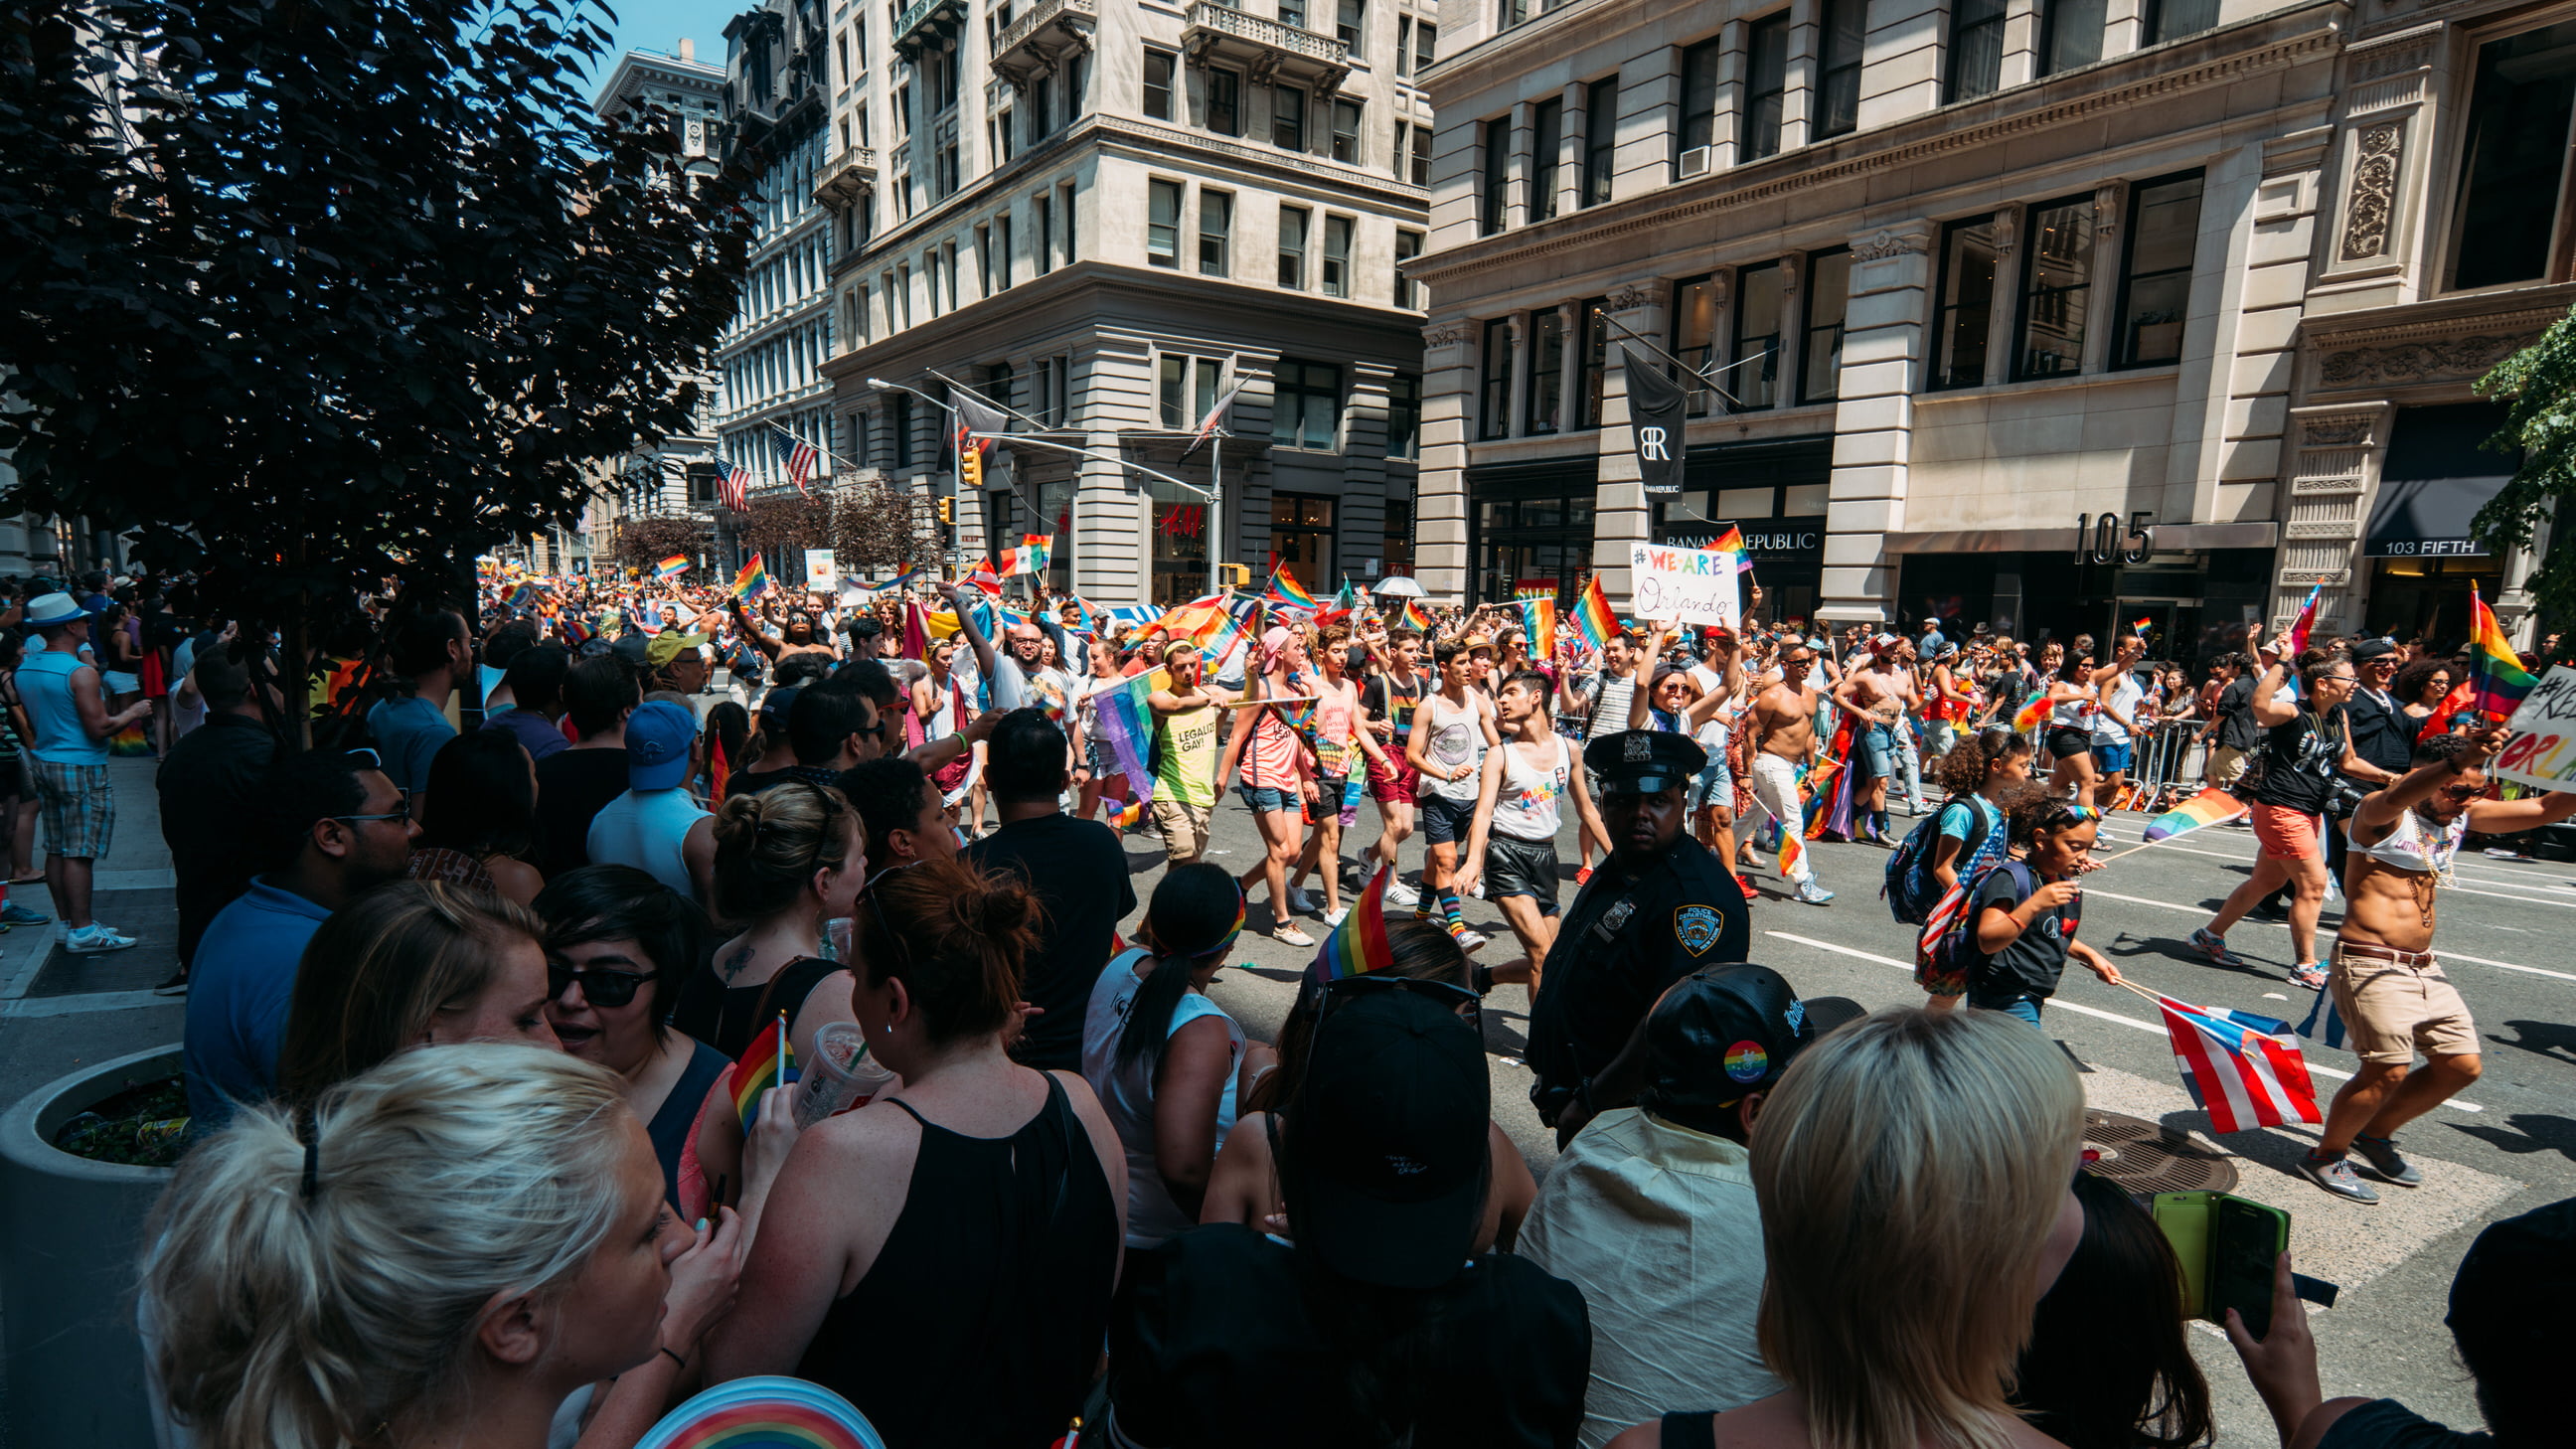 New York City’s Annual LGBT Celebration and Parade